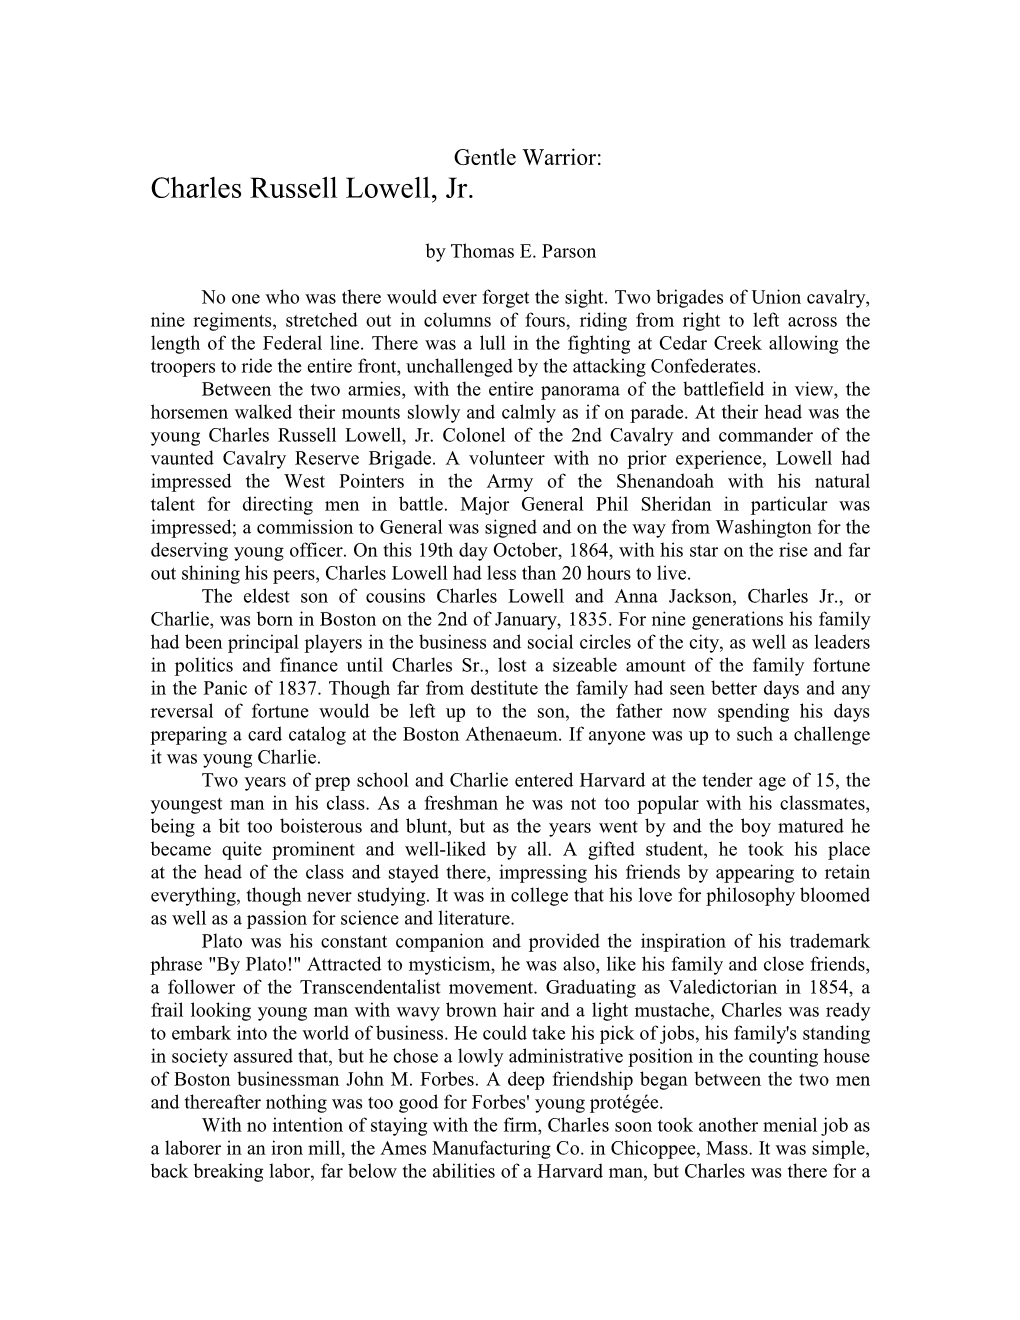 Hist-Lowell Biography